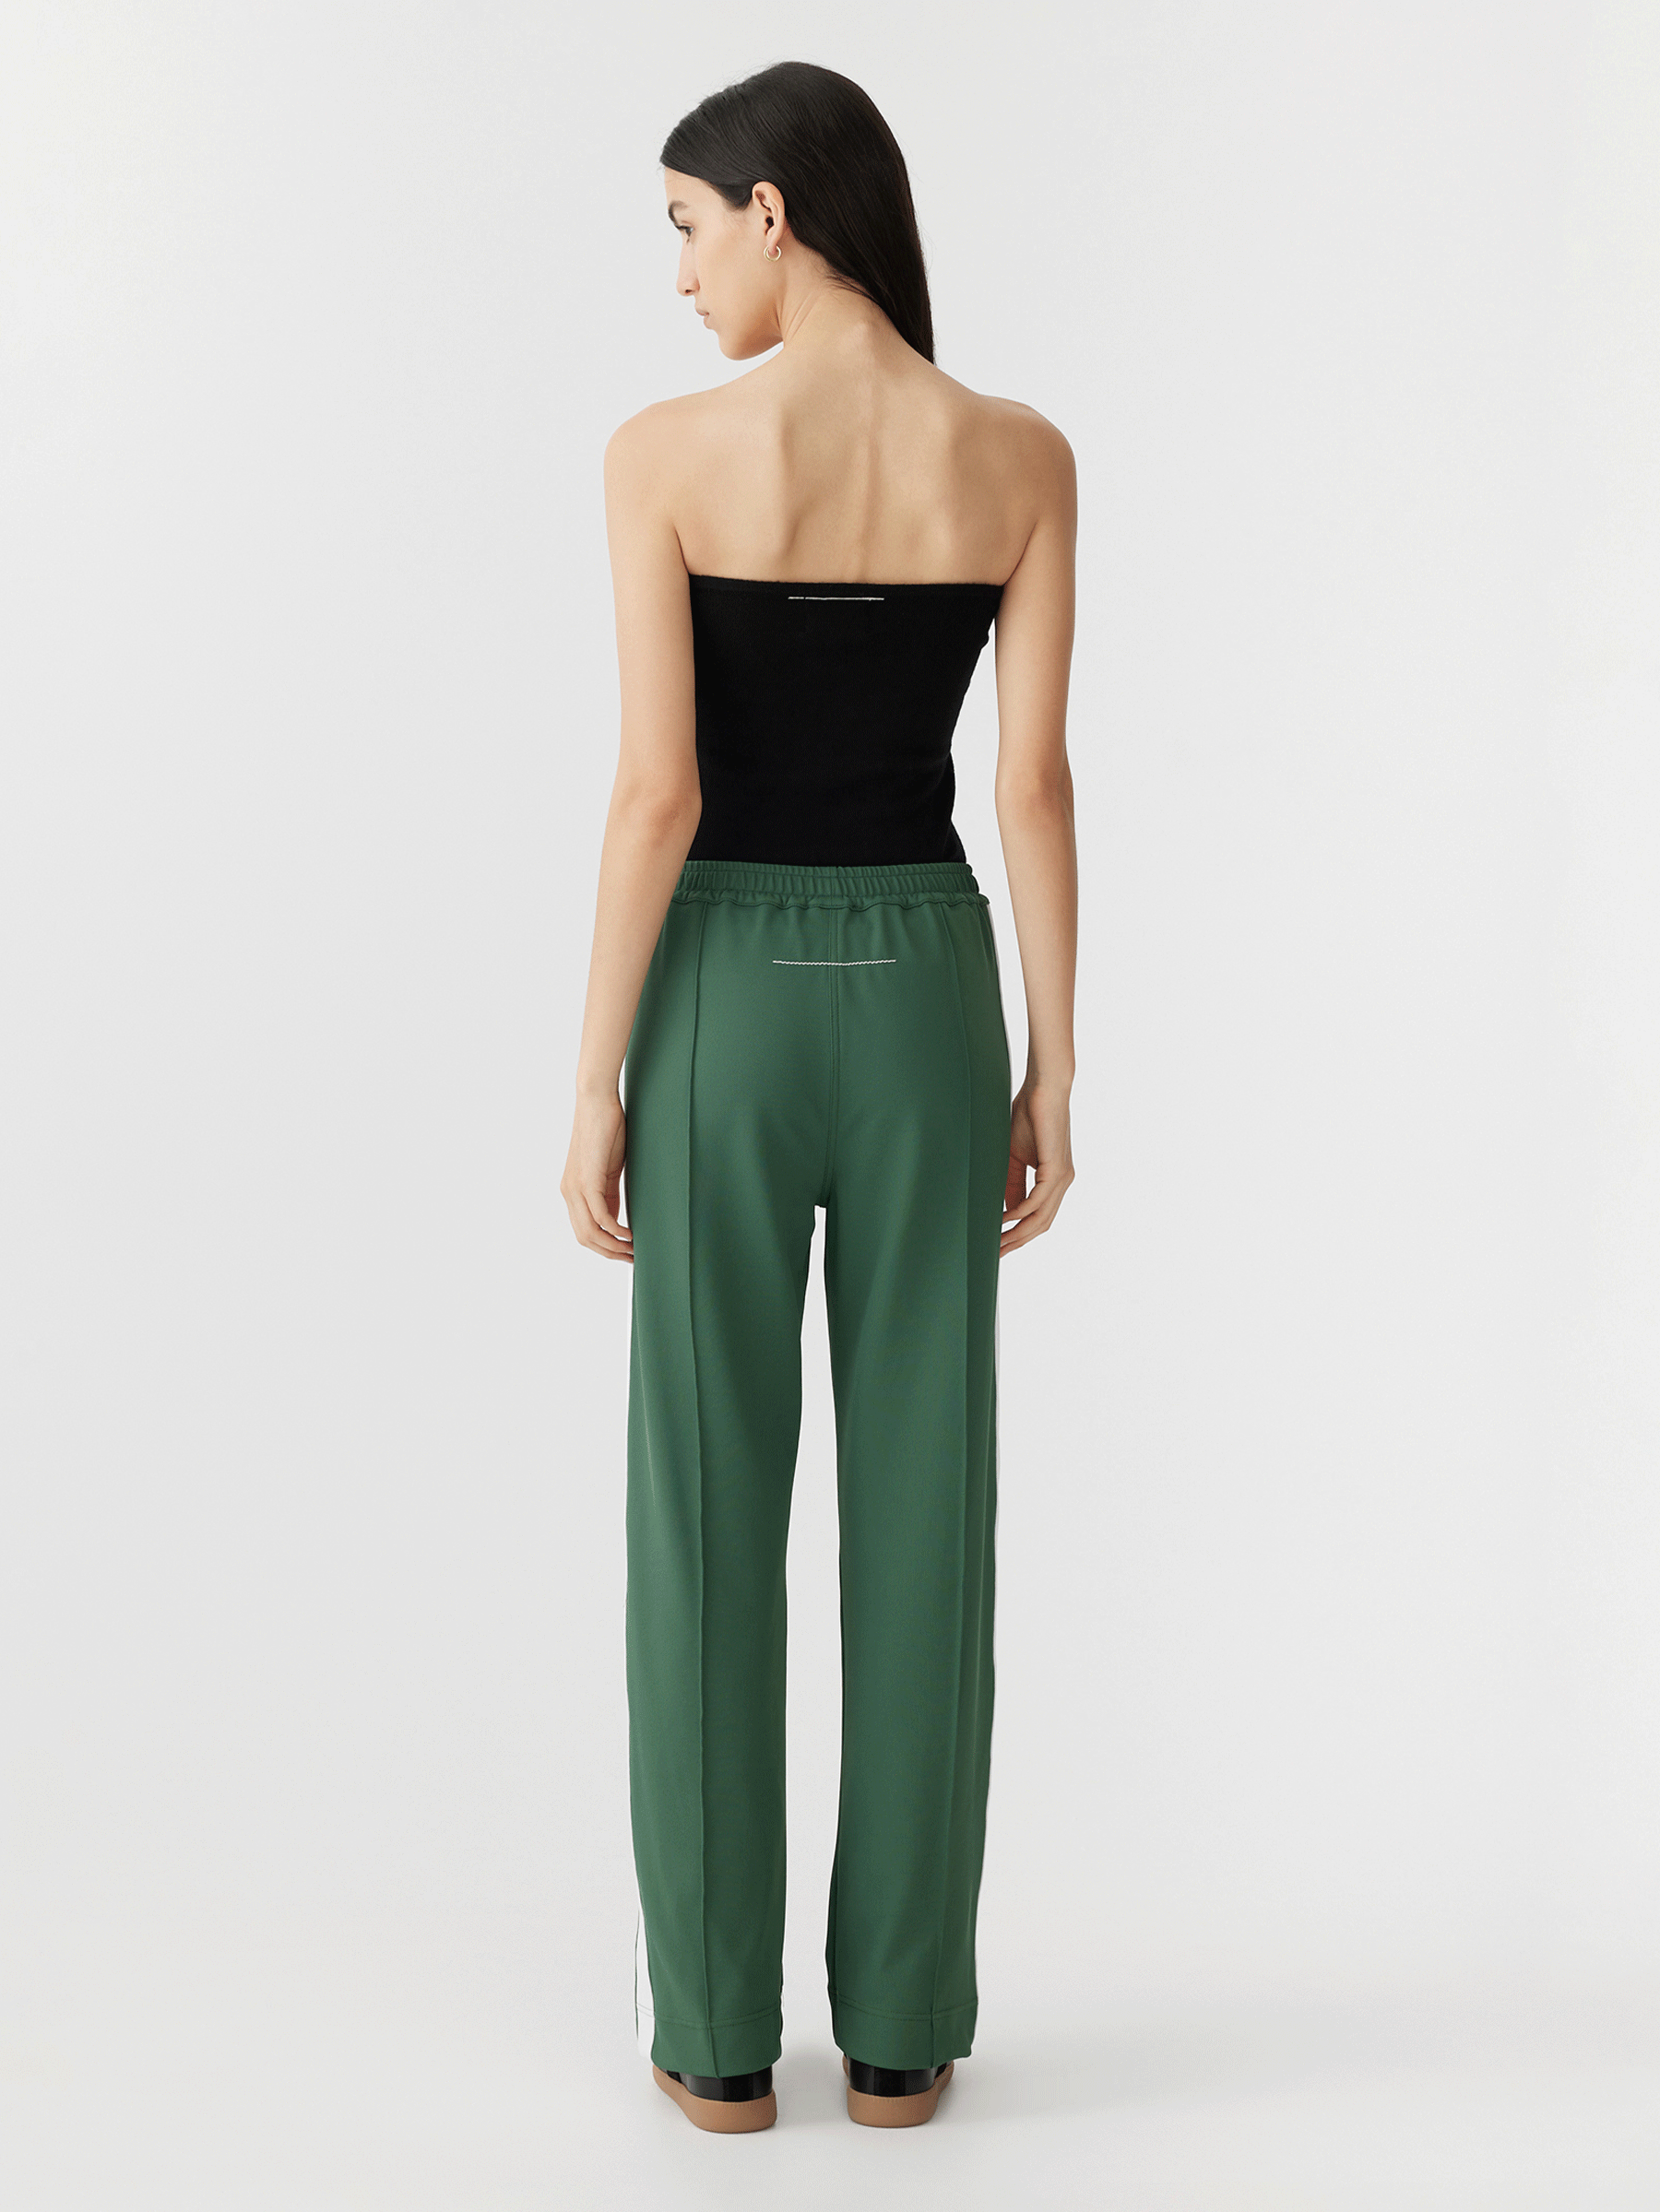 Bassike | Twill Stripe Detail Pant - Athletic Green/White